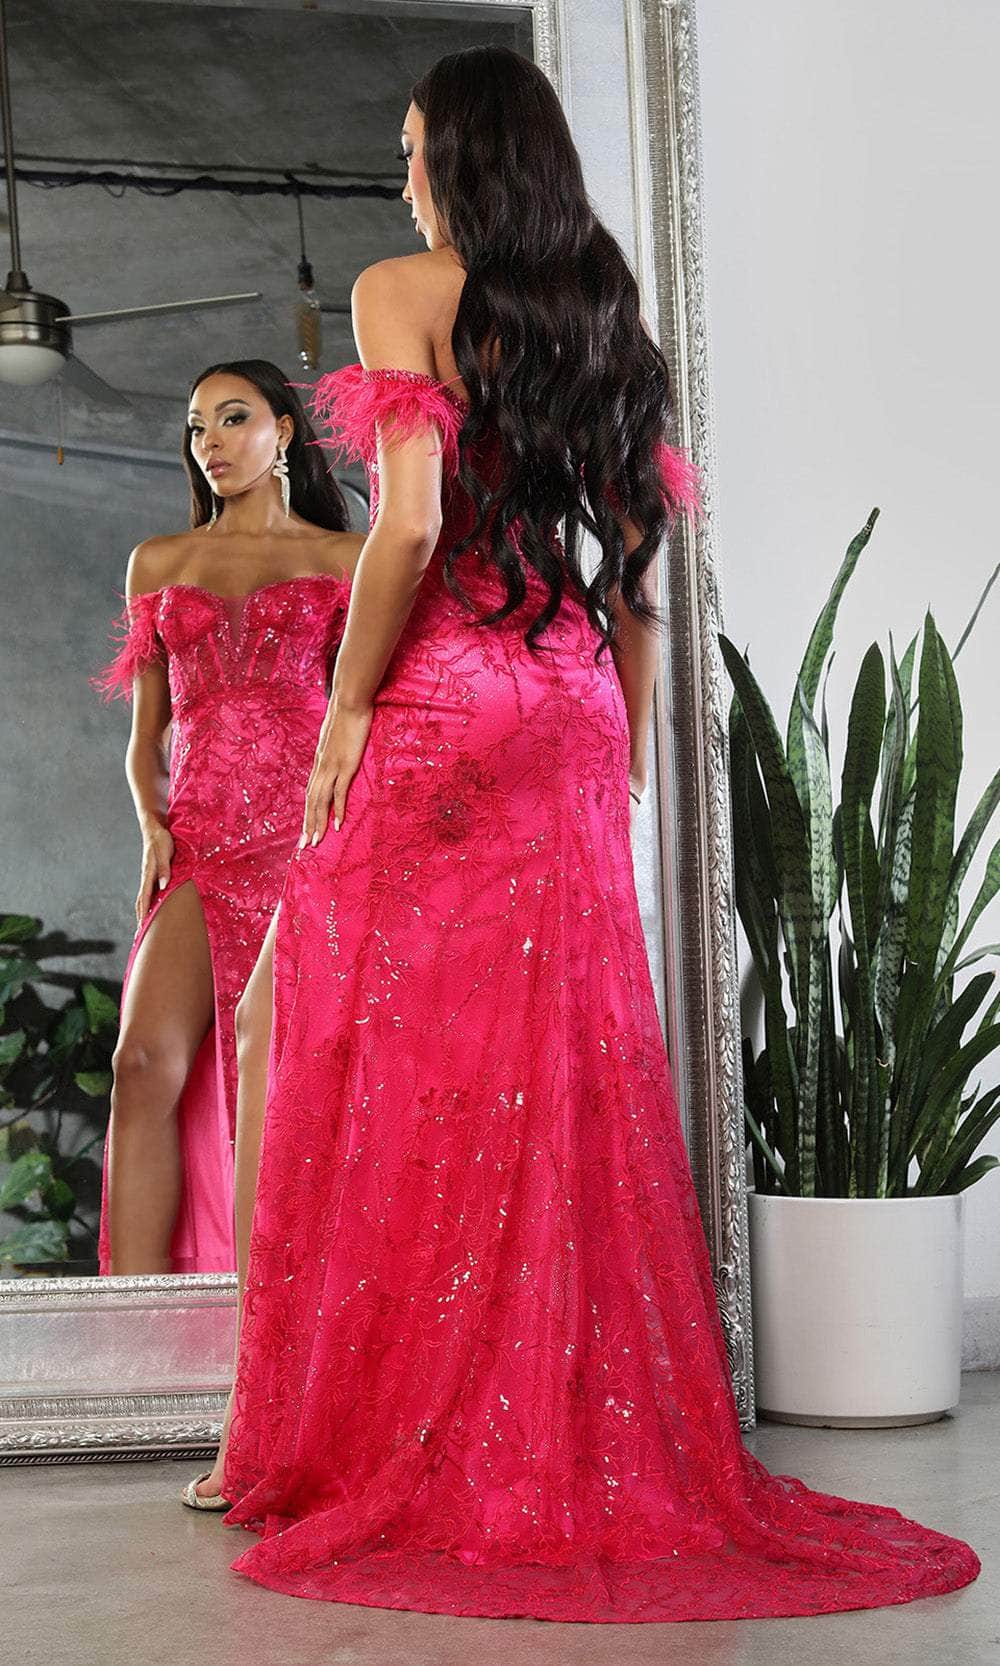 May Queen RQ8072 - Feathered Off Shoulder Prom Gown Evening Dresses